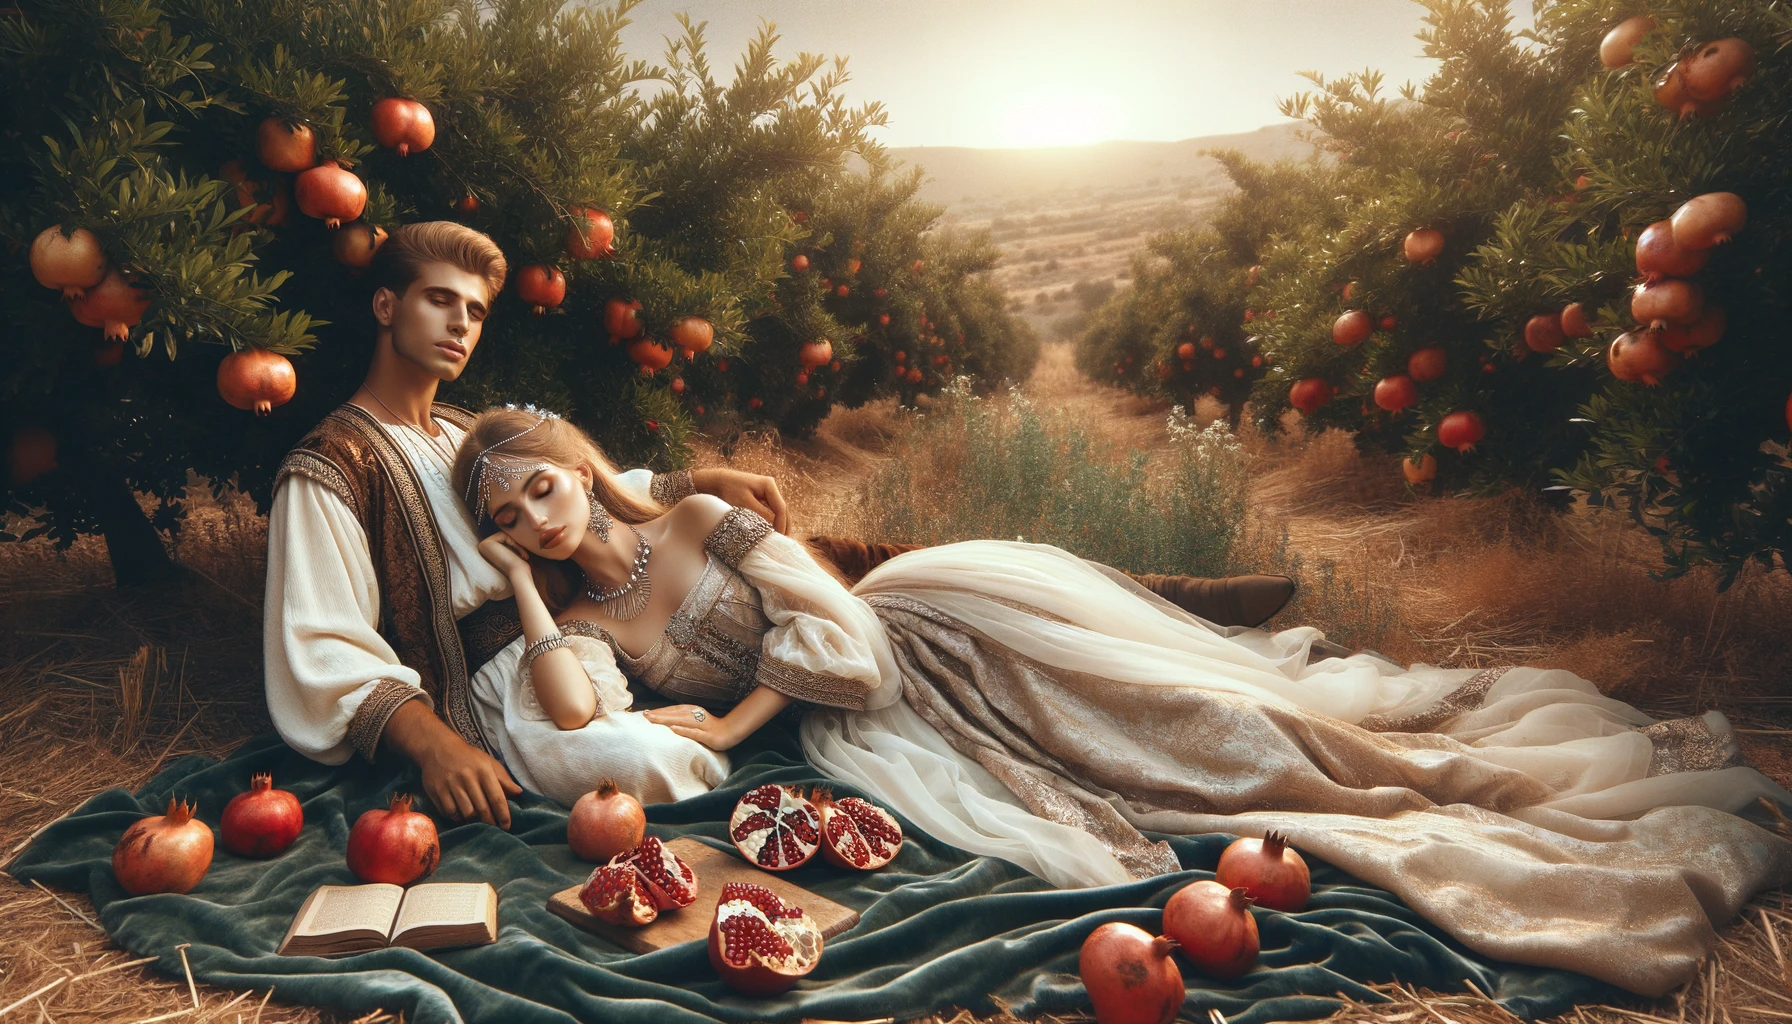 Ark.au Illustrated Bible - Song of Solomon 7:12 - Let us get up early to the vineyards; Let us see whether the vine hath budded, `And' its blossom is open, `And' the pomegranates are in flower: There will I give thee my love.